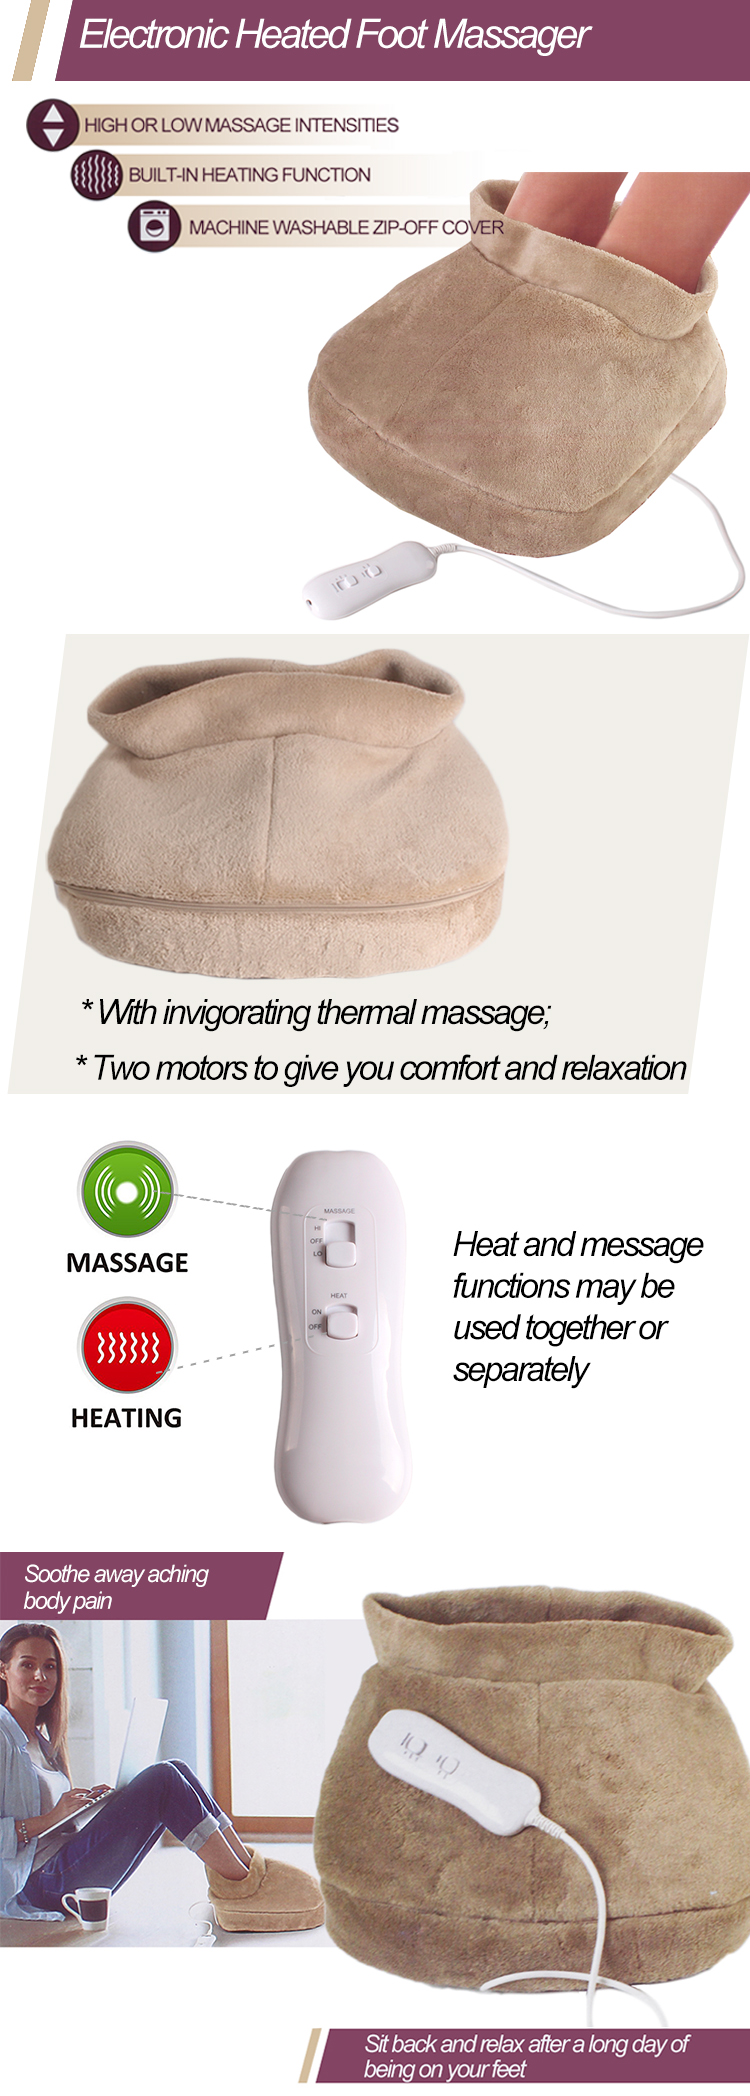 Electronic Heated Foot Massager